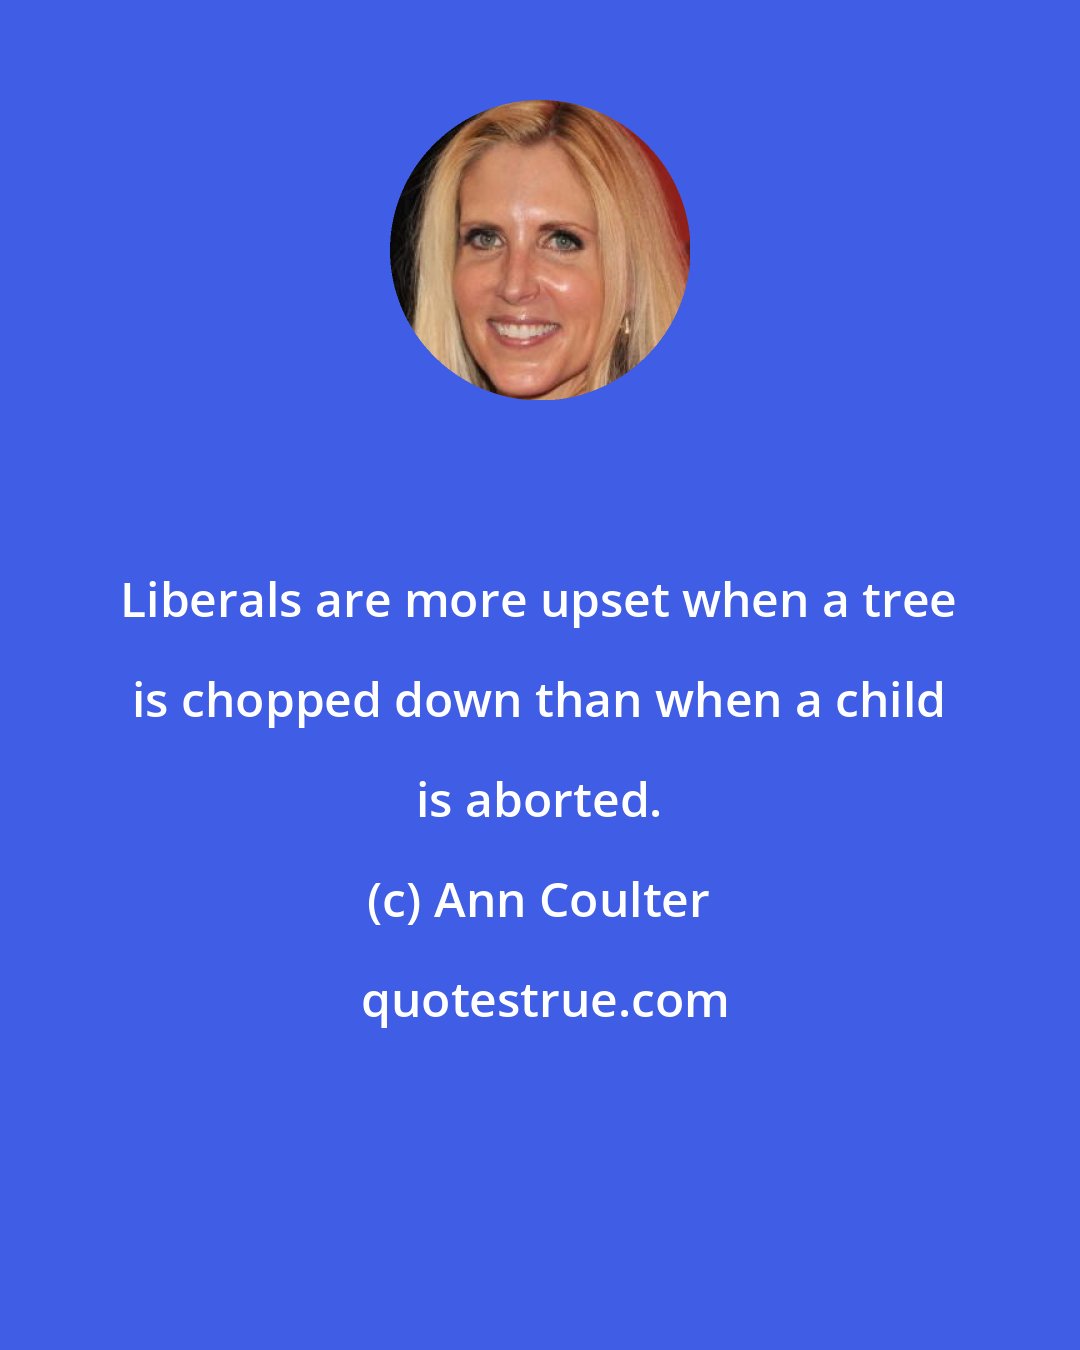 Ann Coulter: Liberals are more upset when a tree is chopped down than when a child is aborted.